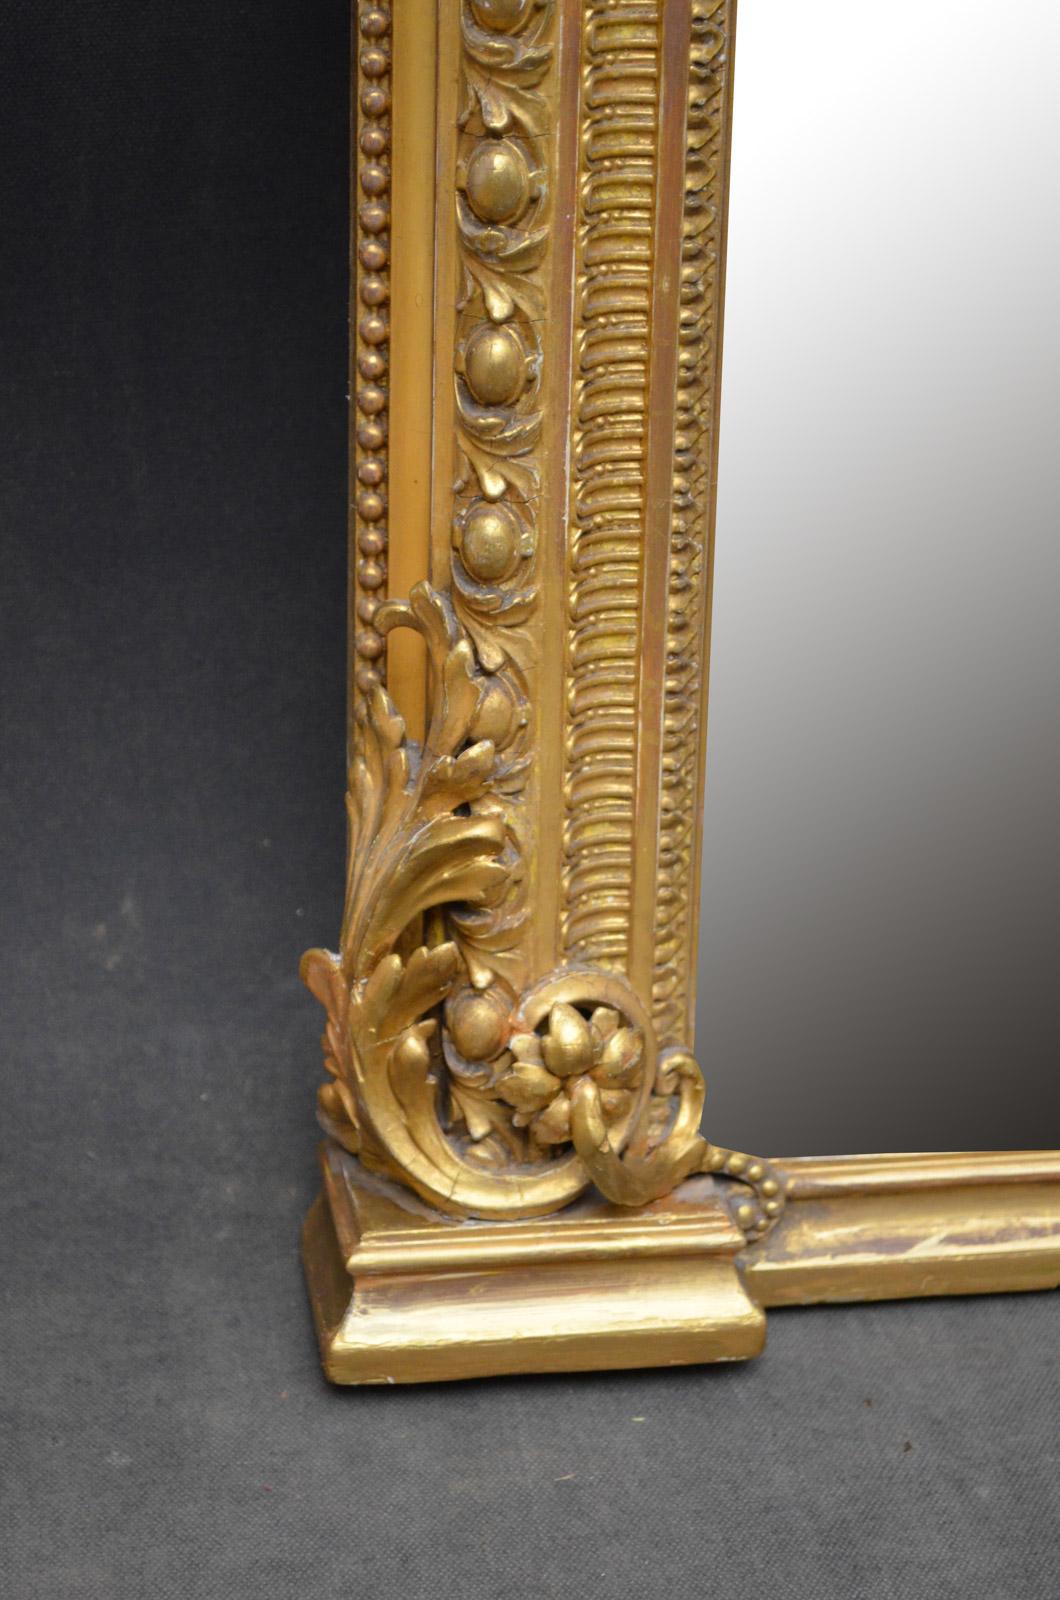 J00, exceptional Victorian giltwood mirror, having original mirror plate with some foxing in finely decorated frame. This antique mirror retains its original mirror plate, original gilt and paneled backboards, all in home ready condition, circa